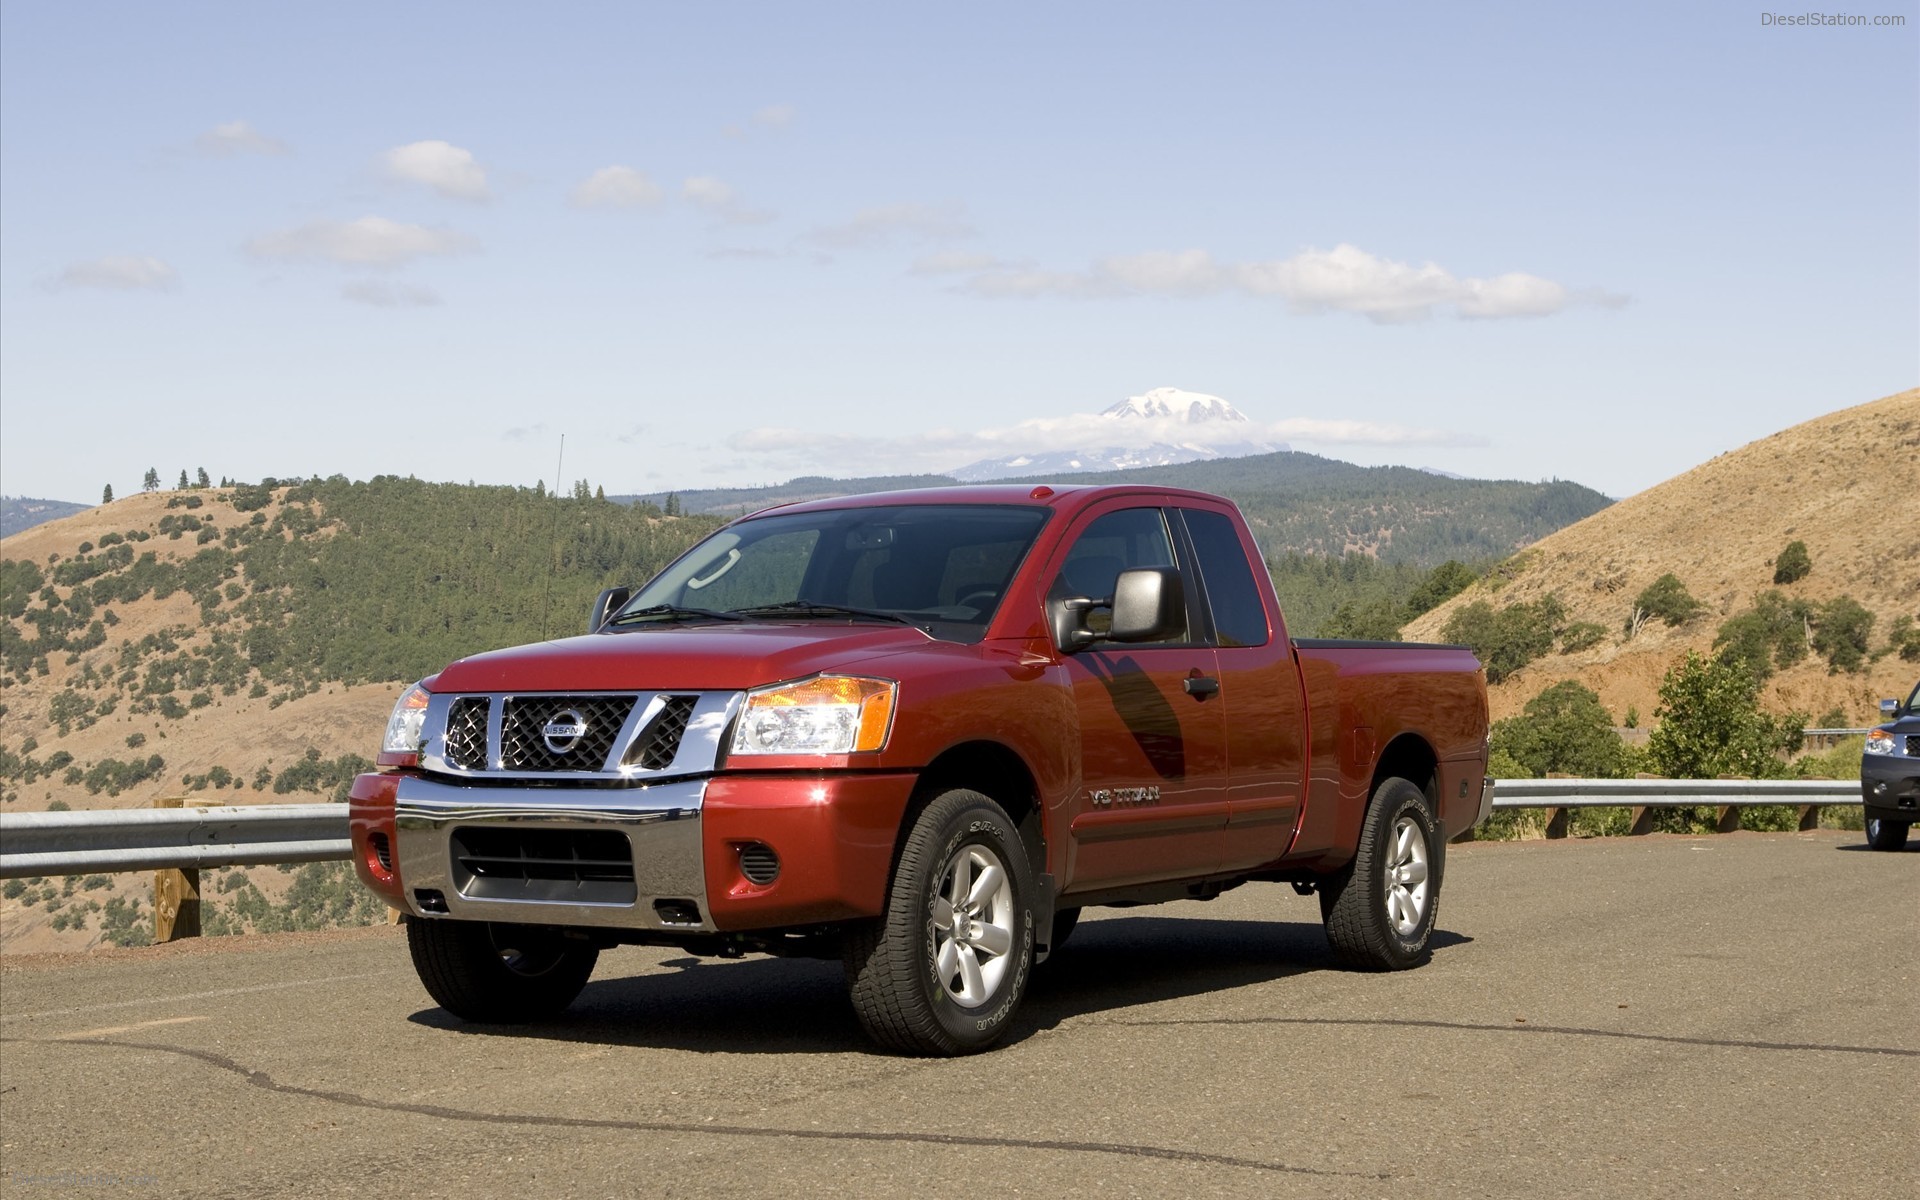 Nissan Titan Widescreen Exotic Car Picture Of